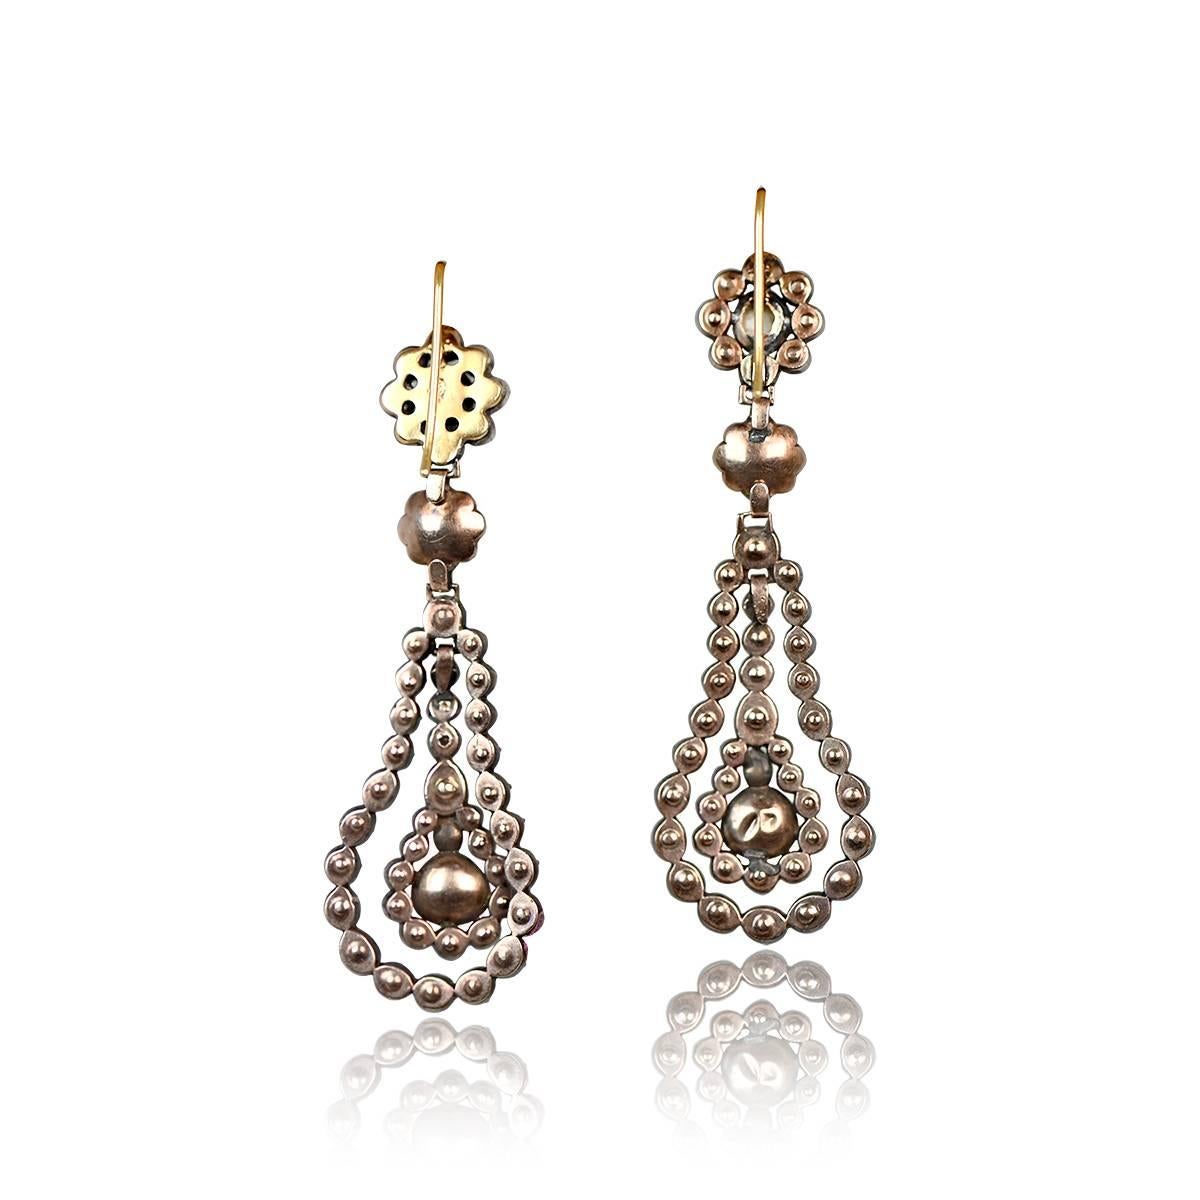 A lovely pair of antique diamond earrings with silver on gold mounting from the Georgian era, circa 1810. Each earring features a suspended antique pear-shaped rose-cut diamond, surrounded by a double oval halo of rose-cut diamonds. The total